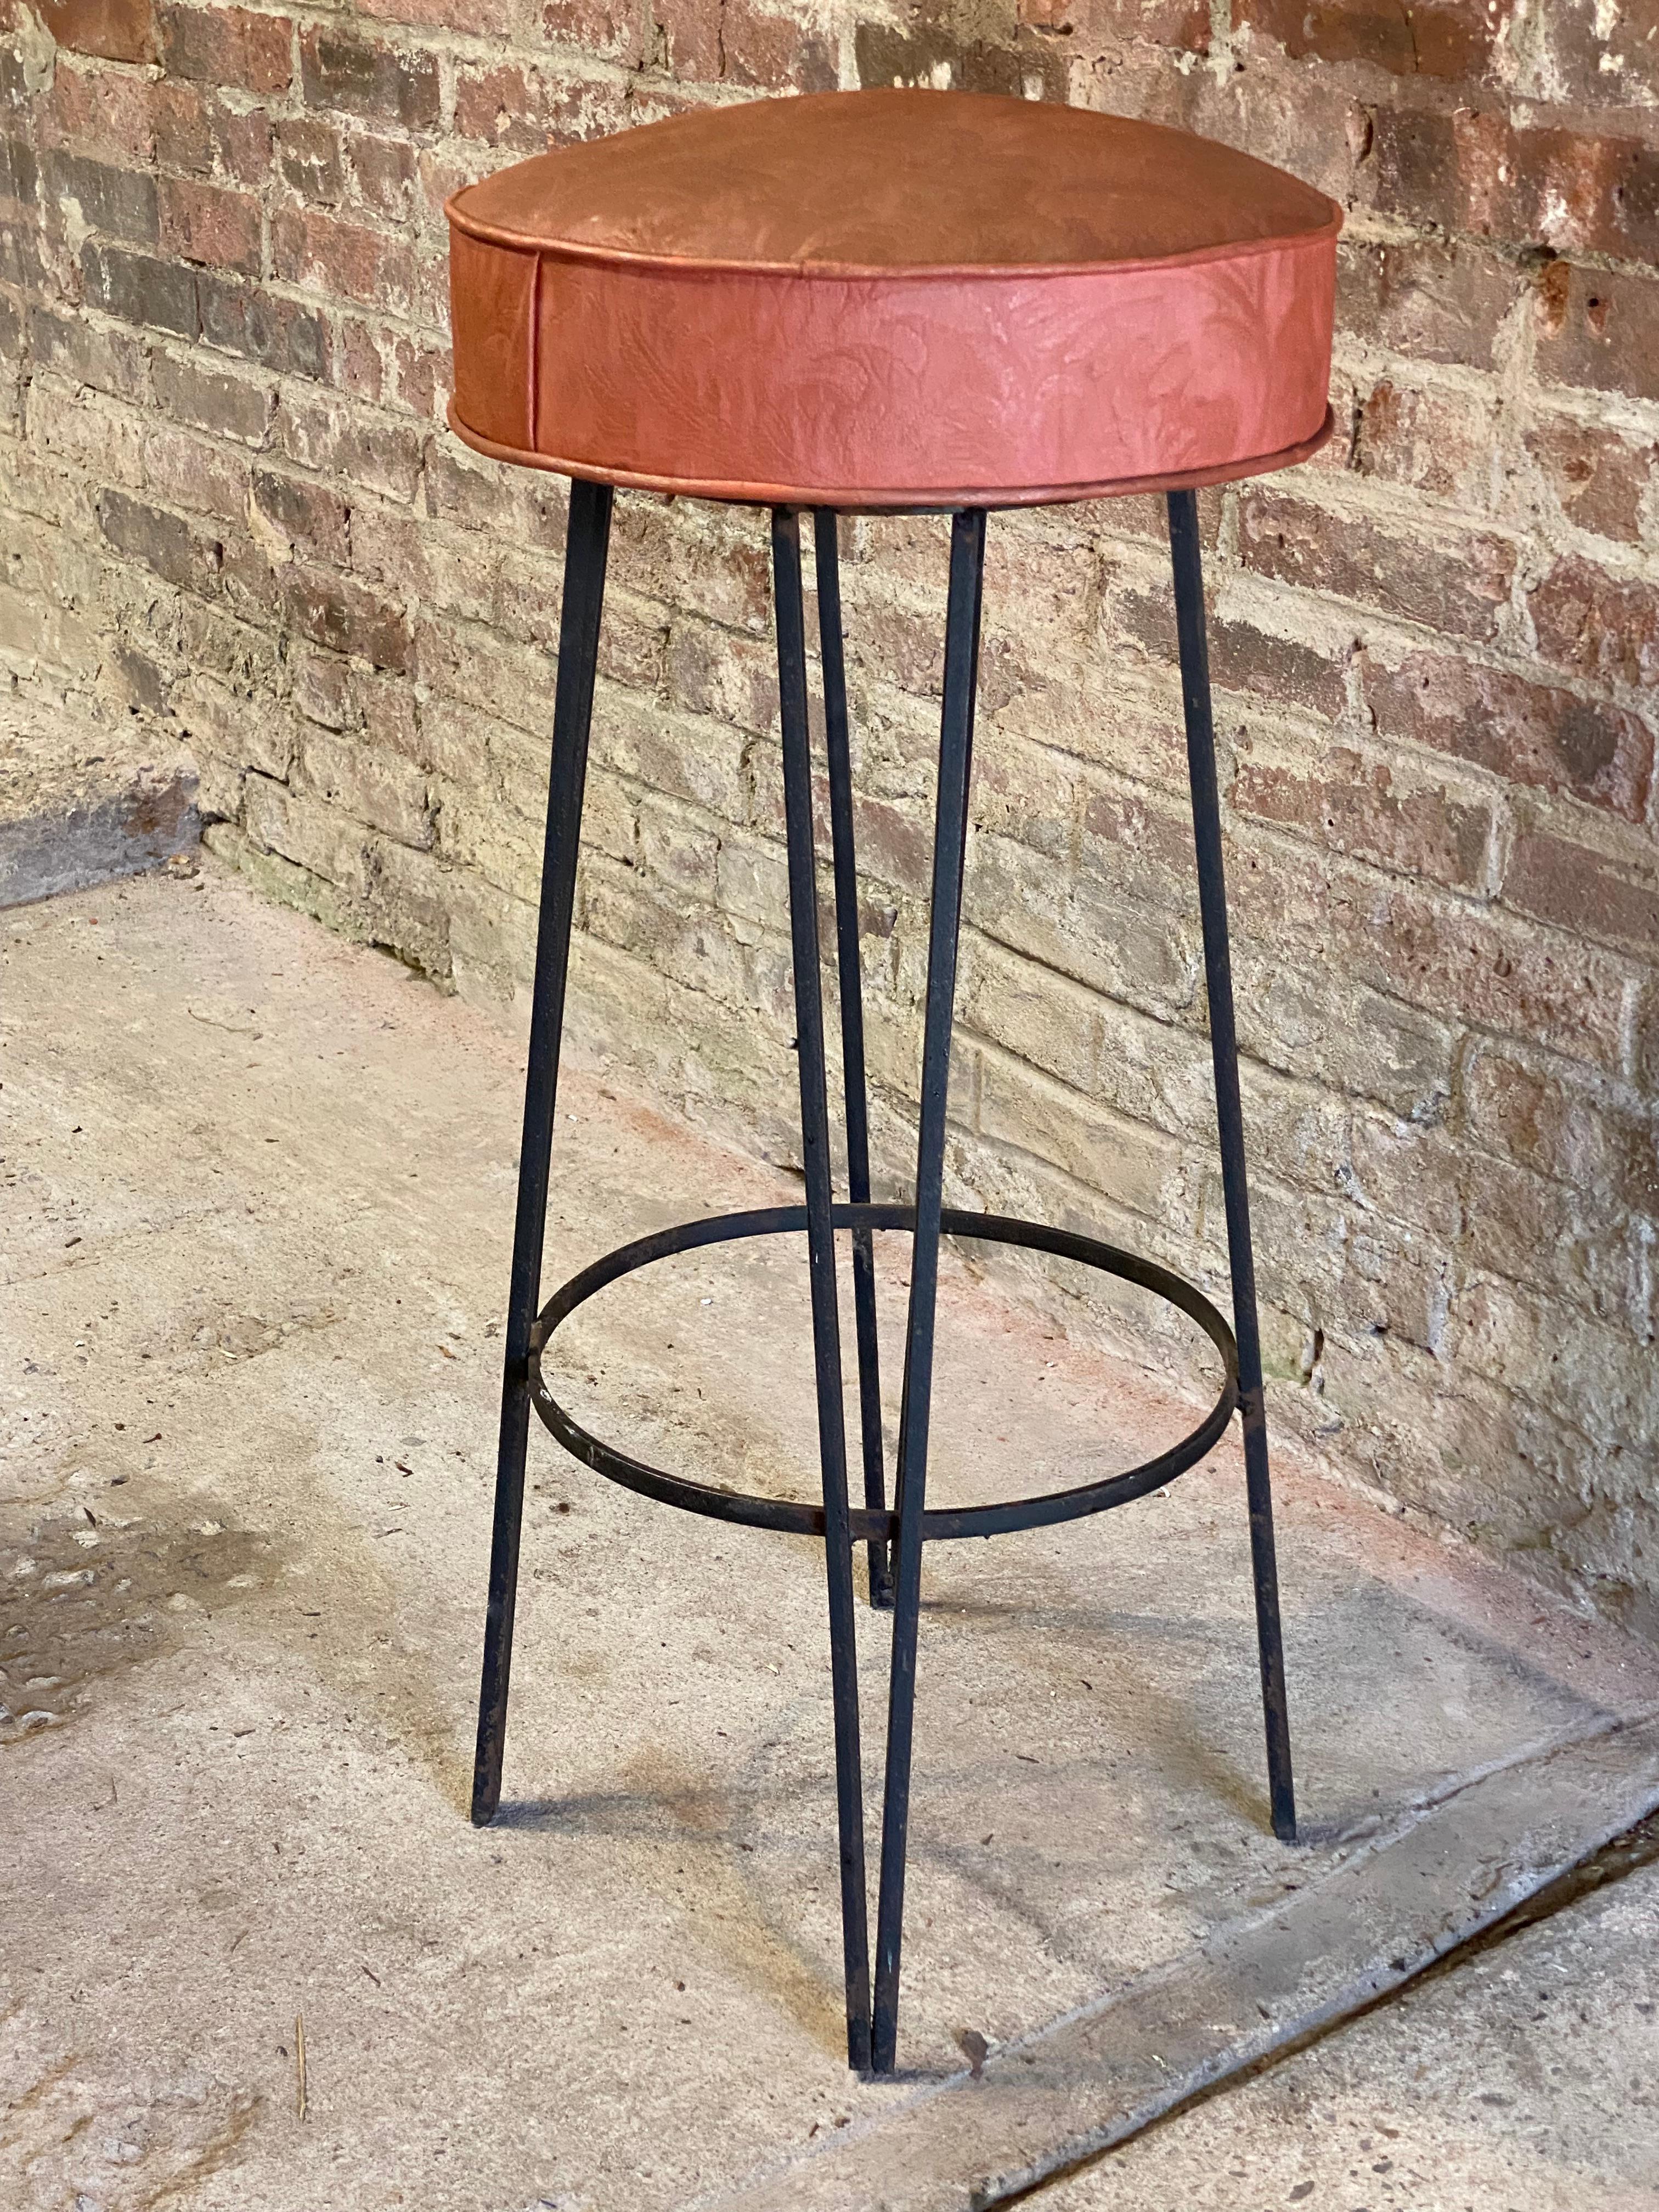 1950s Iron Hairpin Leg Bar Stools In Good Condition For Sale In Garnerville, NY